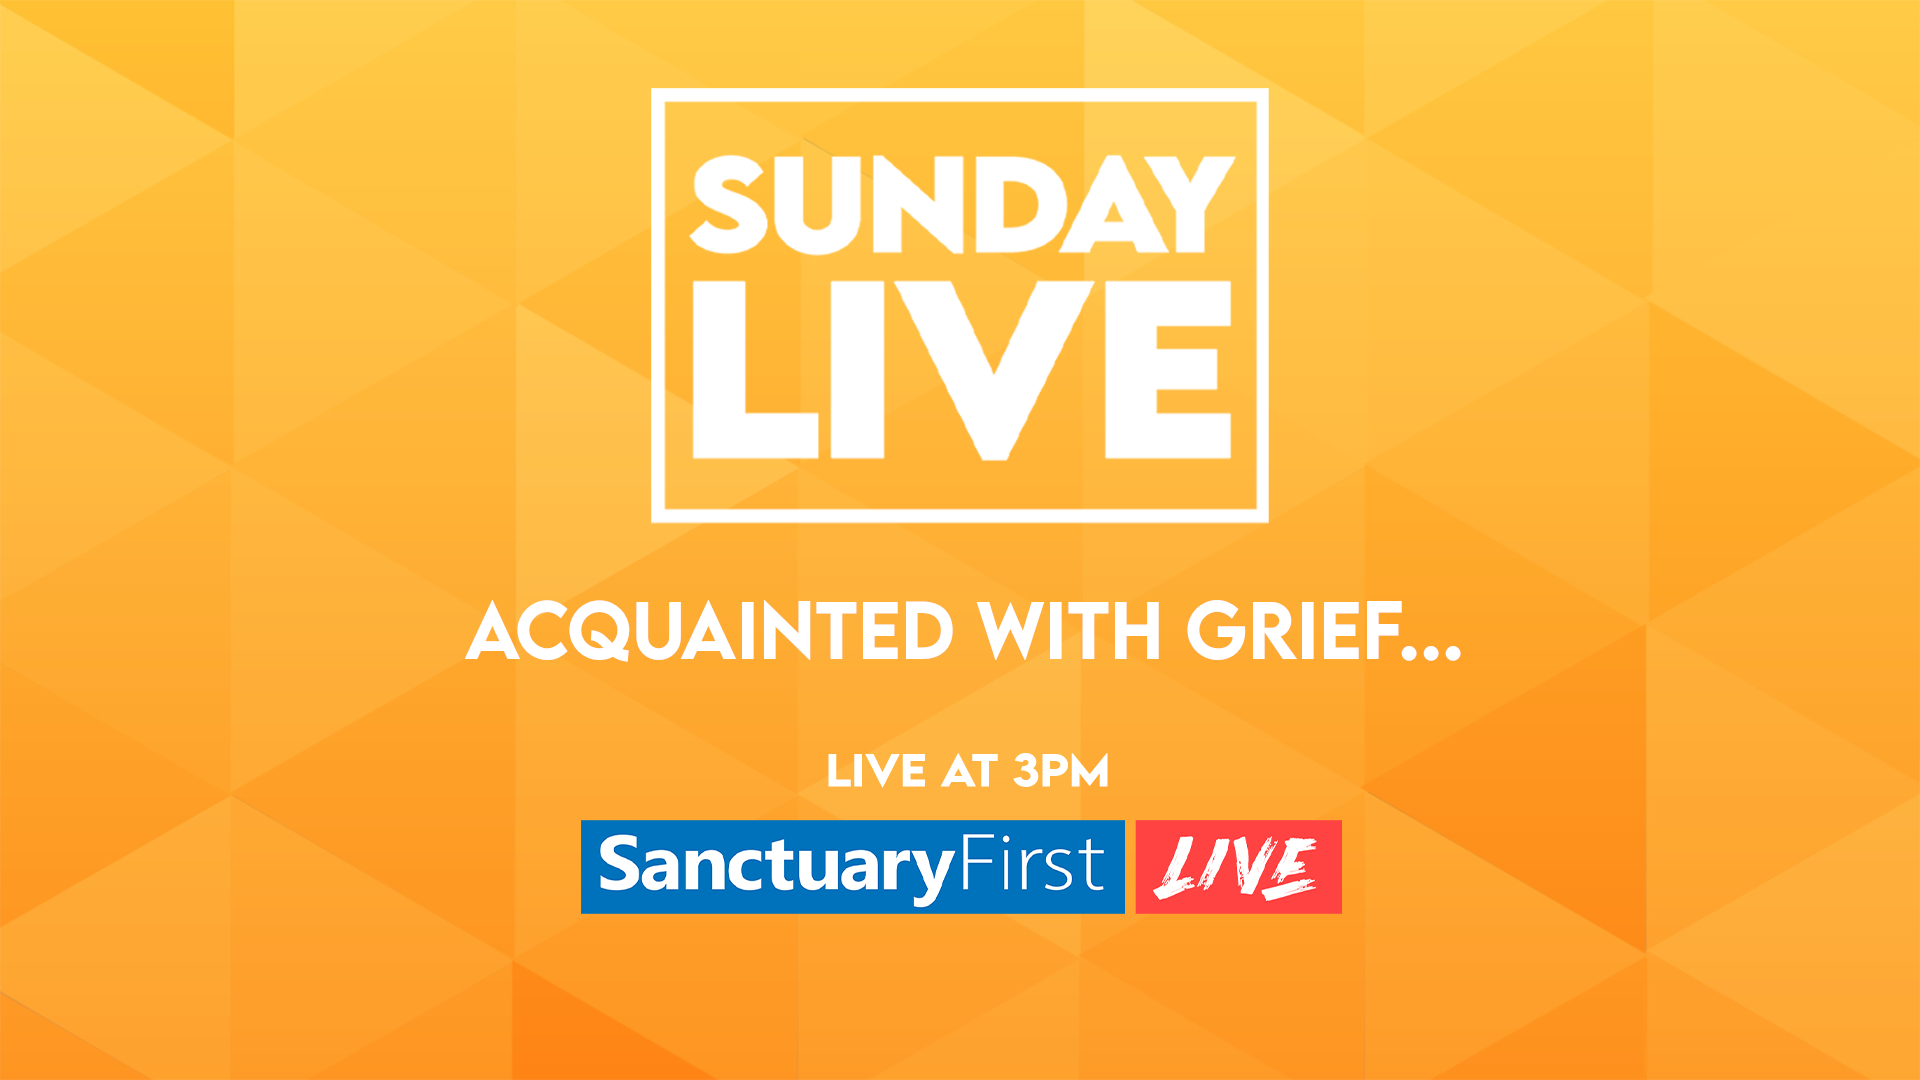 Sunday Live - Acquainted with grief